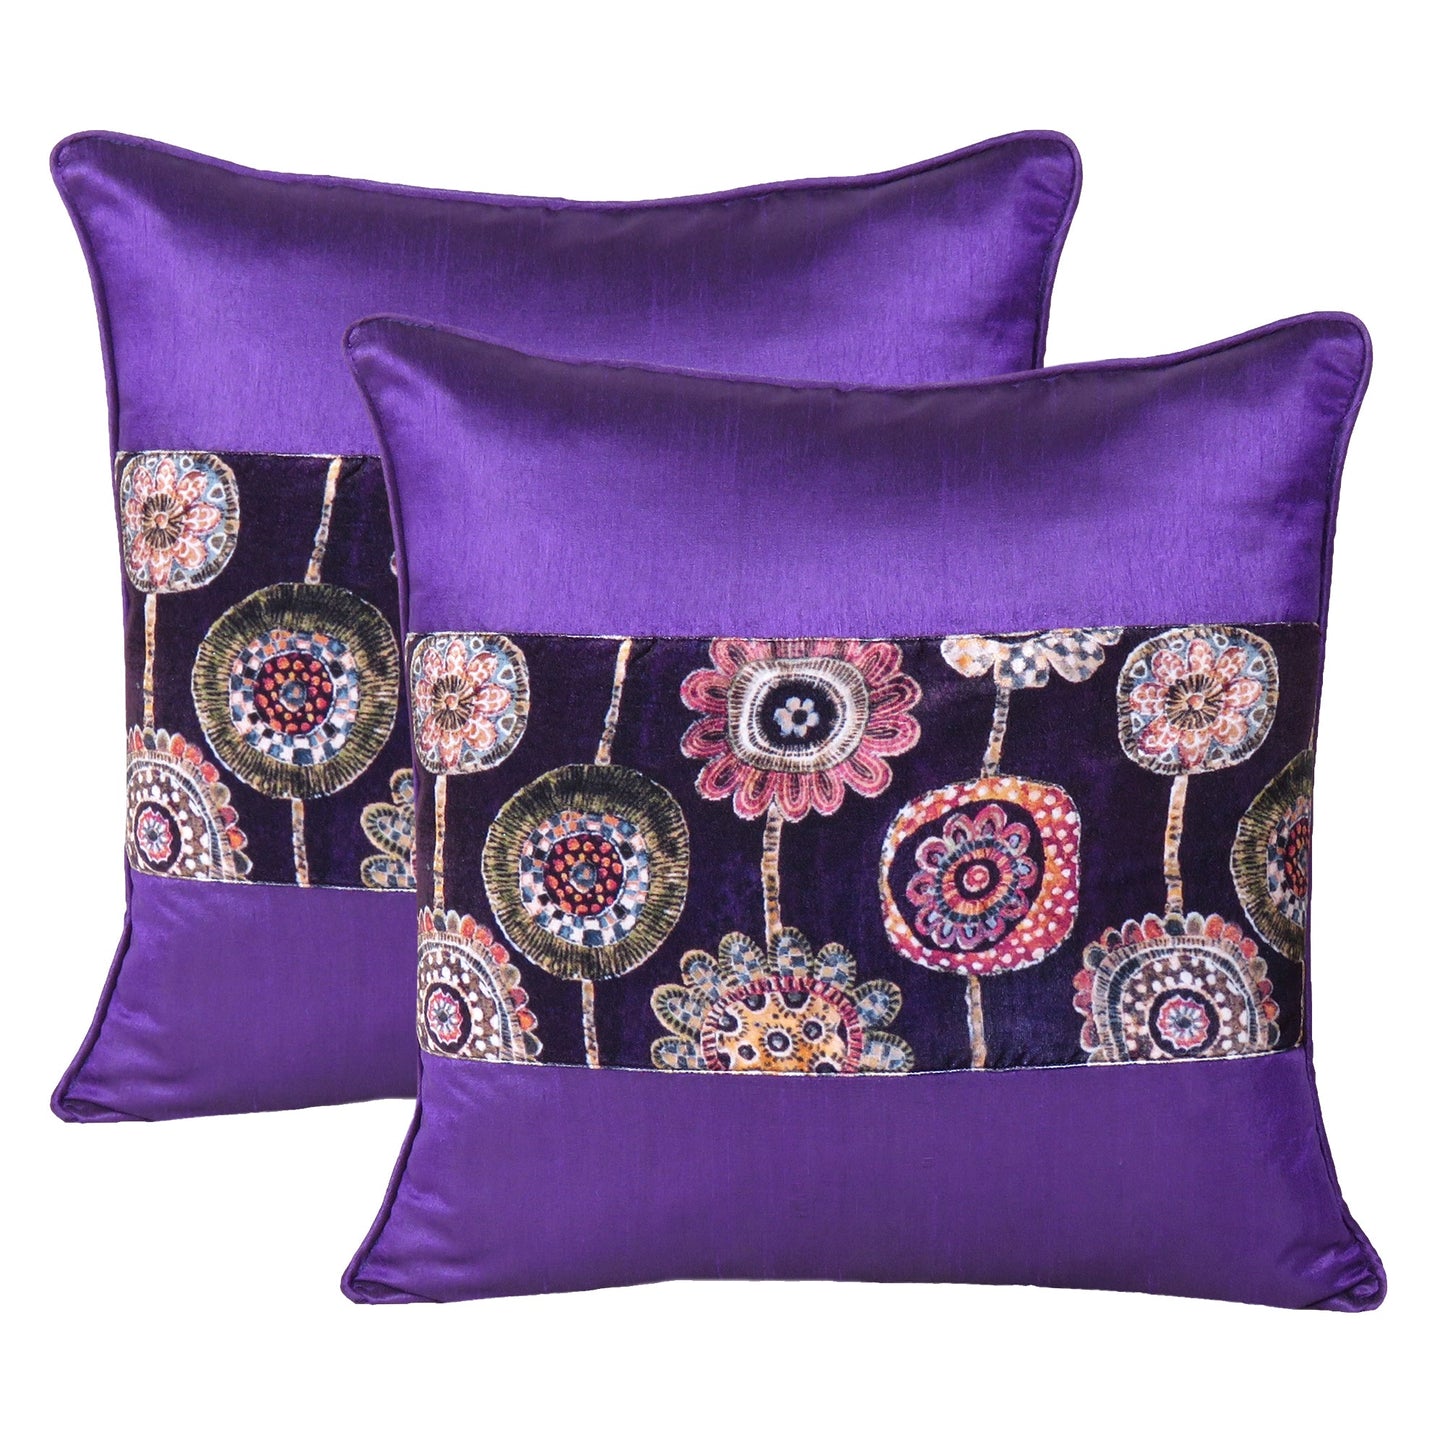 Velvet Polydupion Decorative Printed Cushion Cases in Set of 2 - Purple